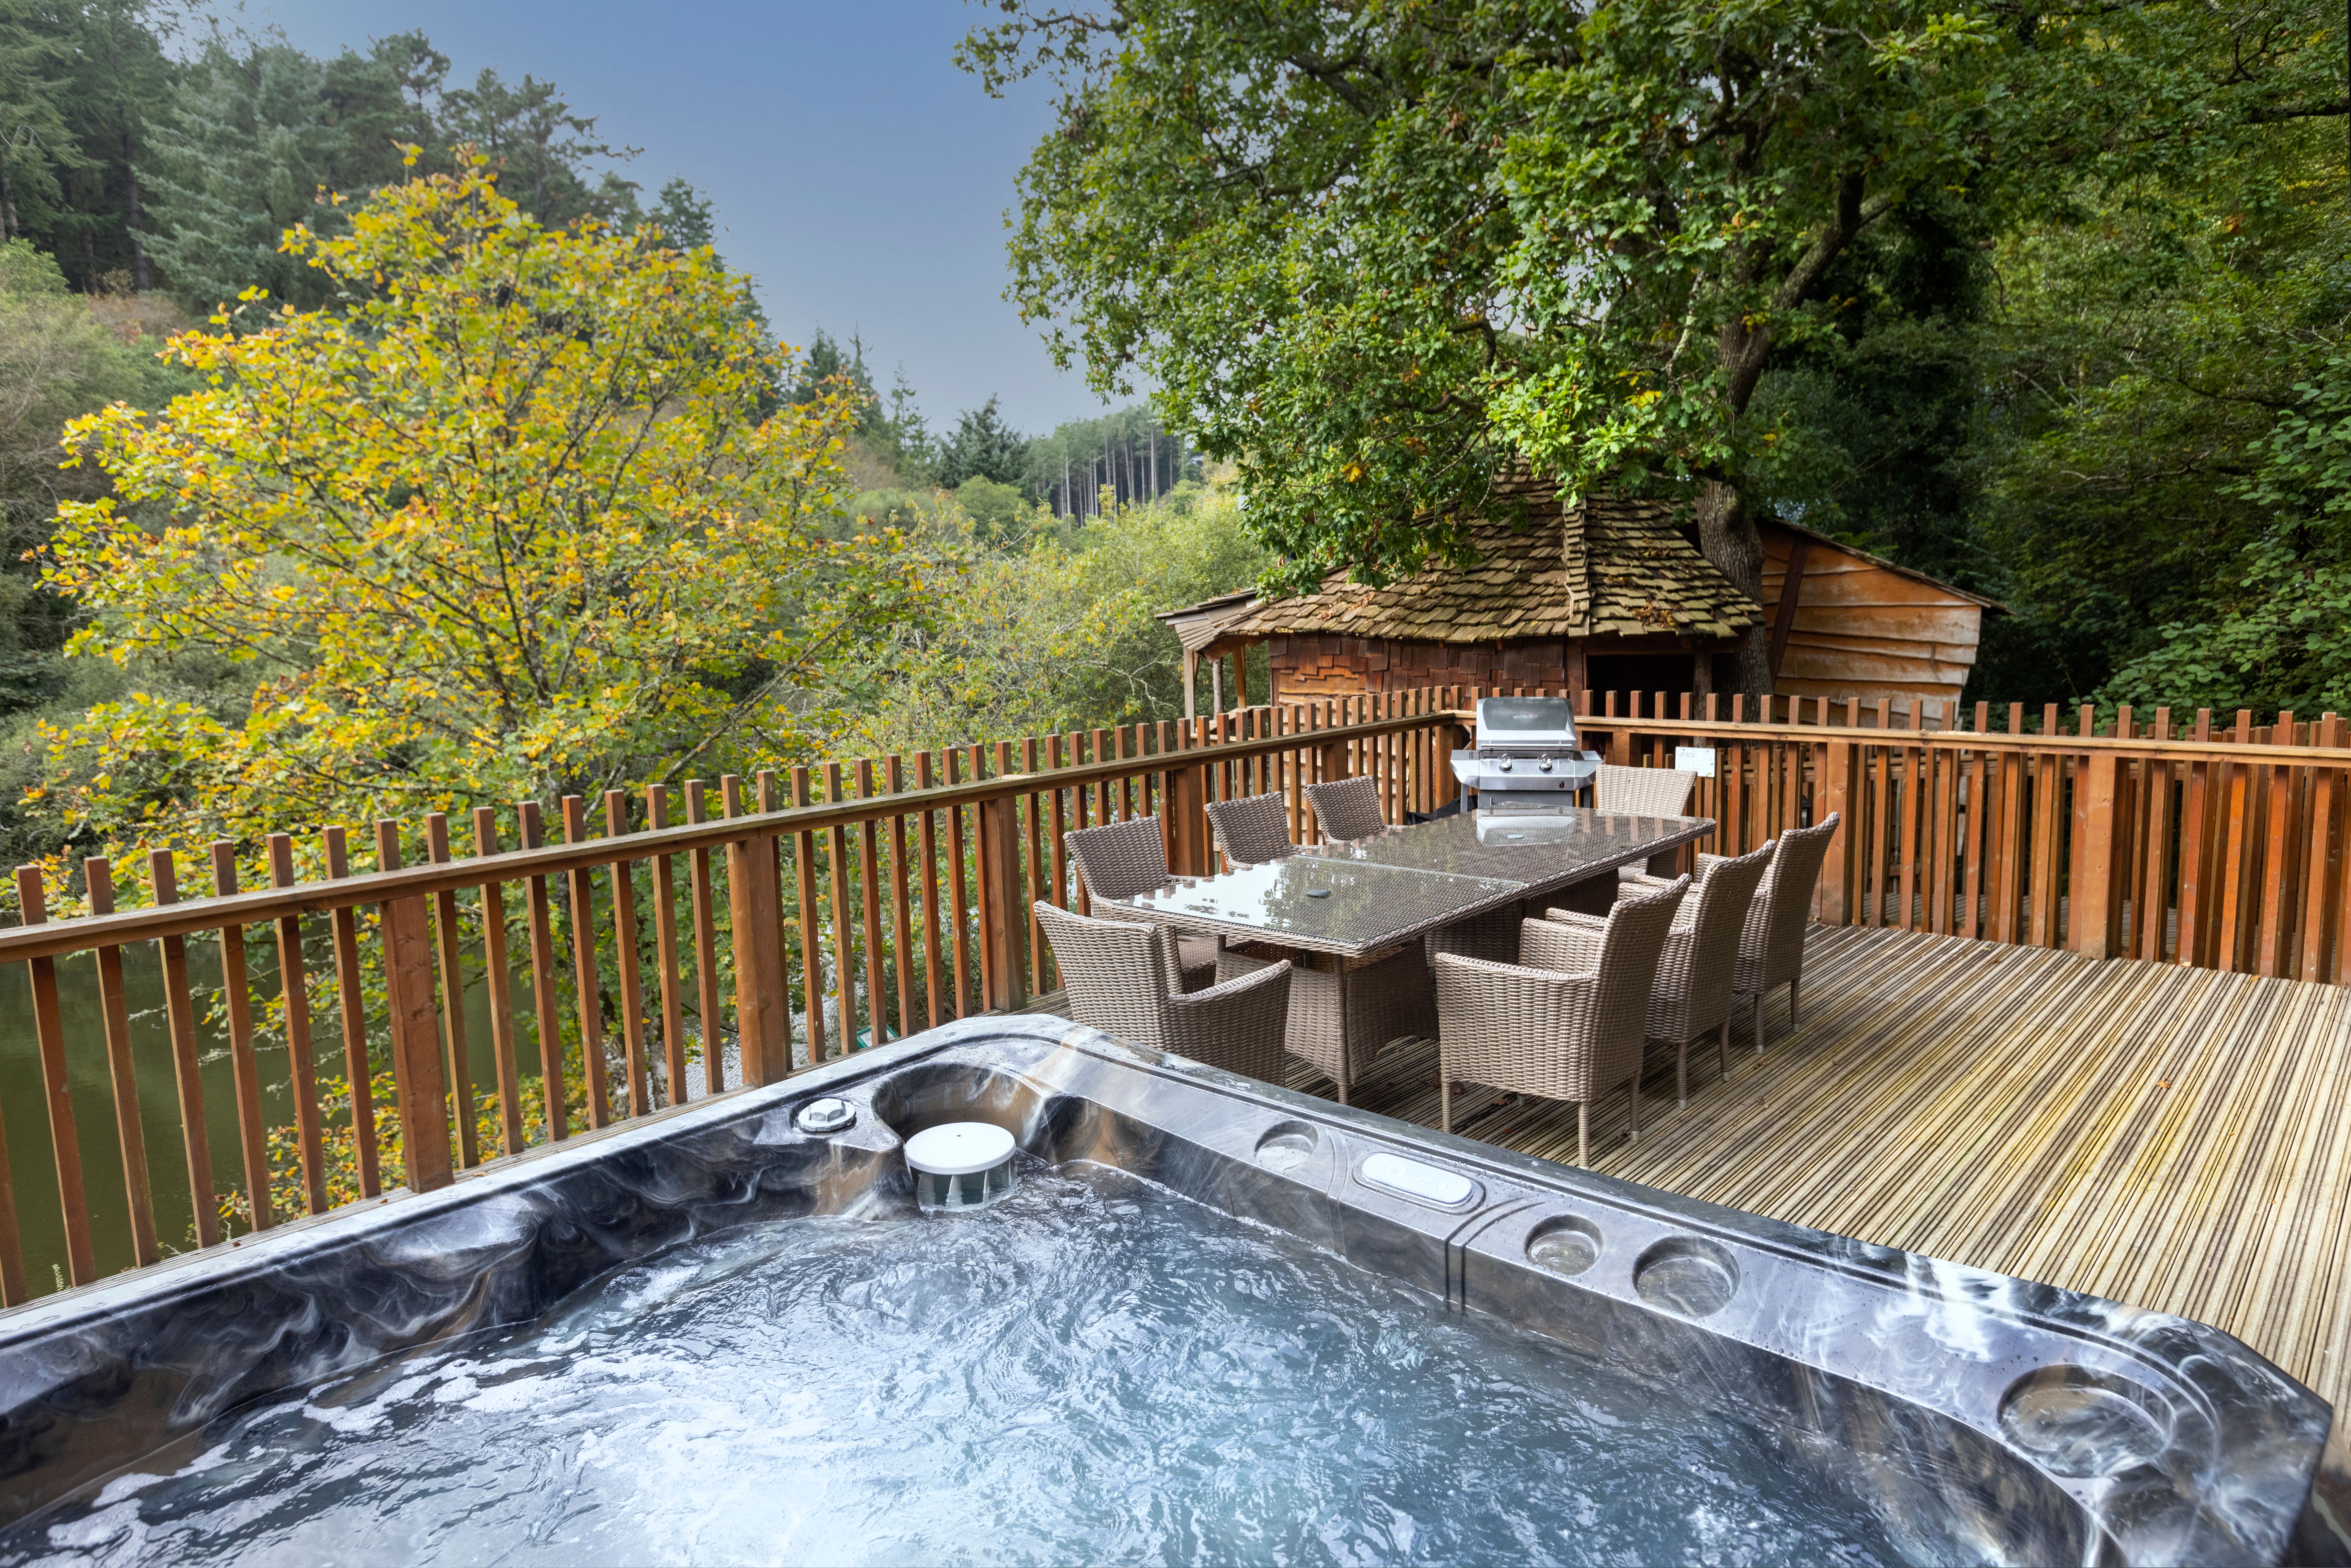 https://assets.forestholidays.co.uk/damprodblob/assets/siteassets/locations/cornwall/deerpark/accommodation-page/golden-oak-treehouse/goth_hot_tub_41a6852fc5.jpg